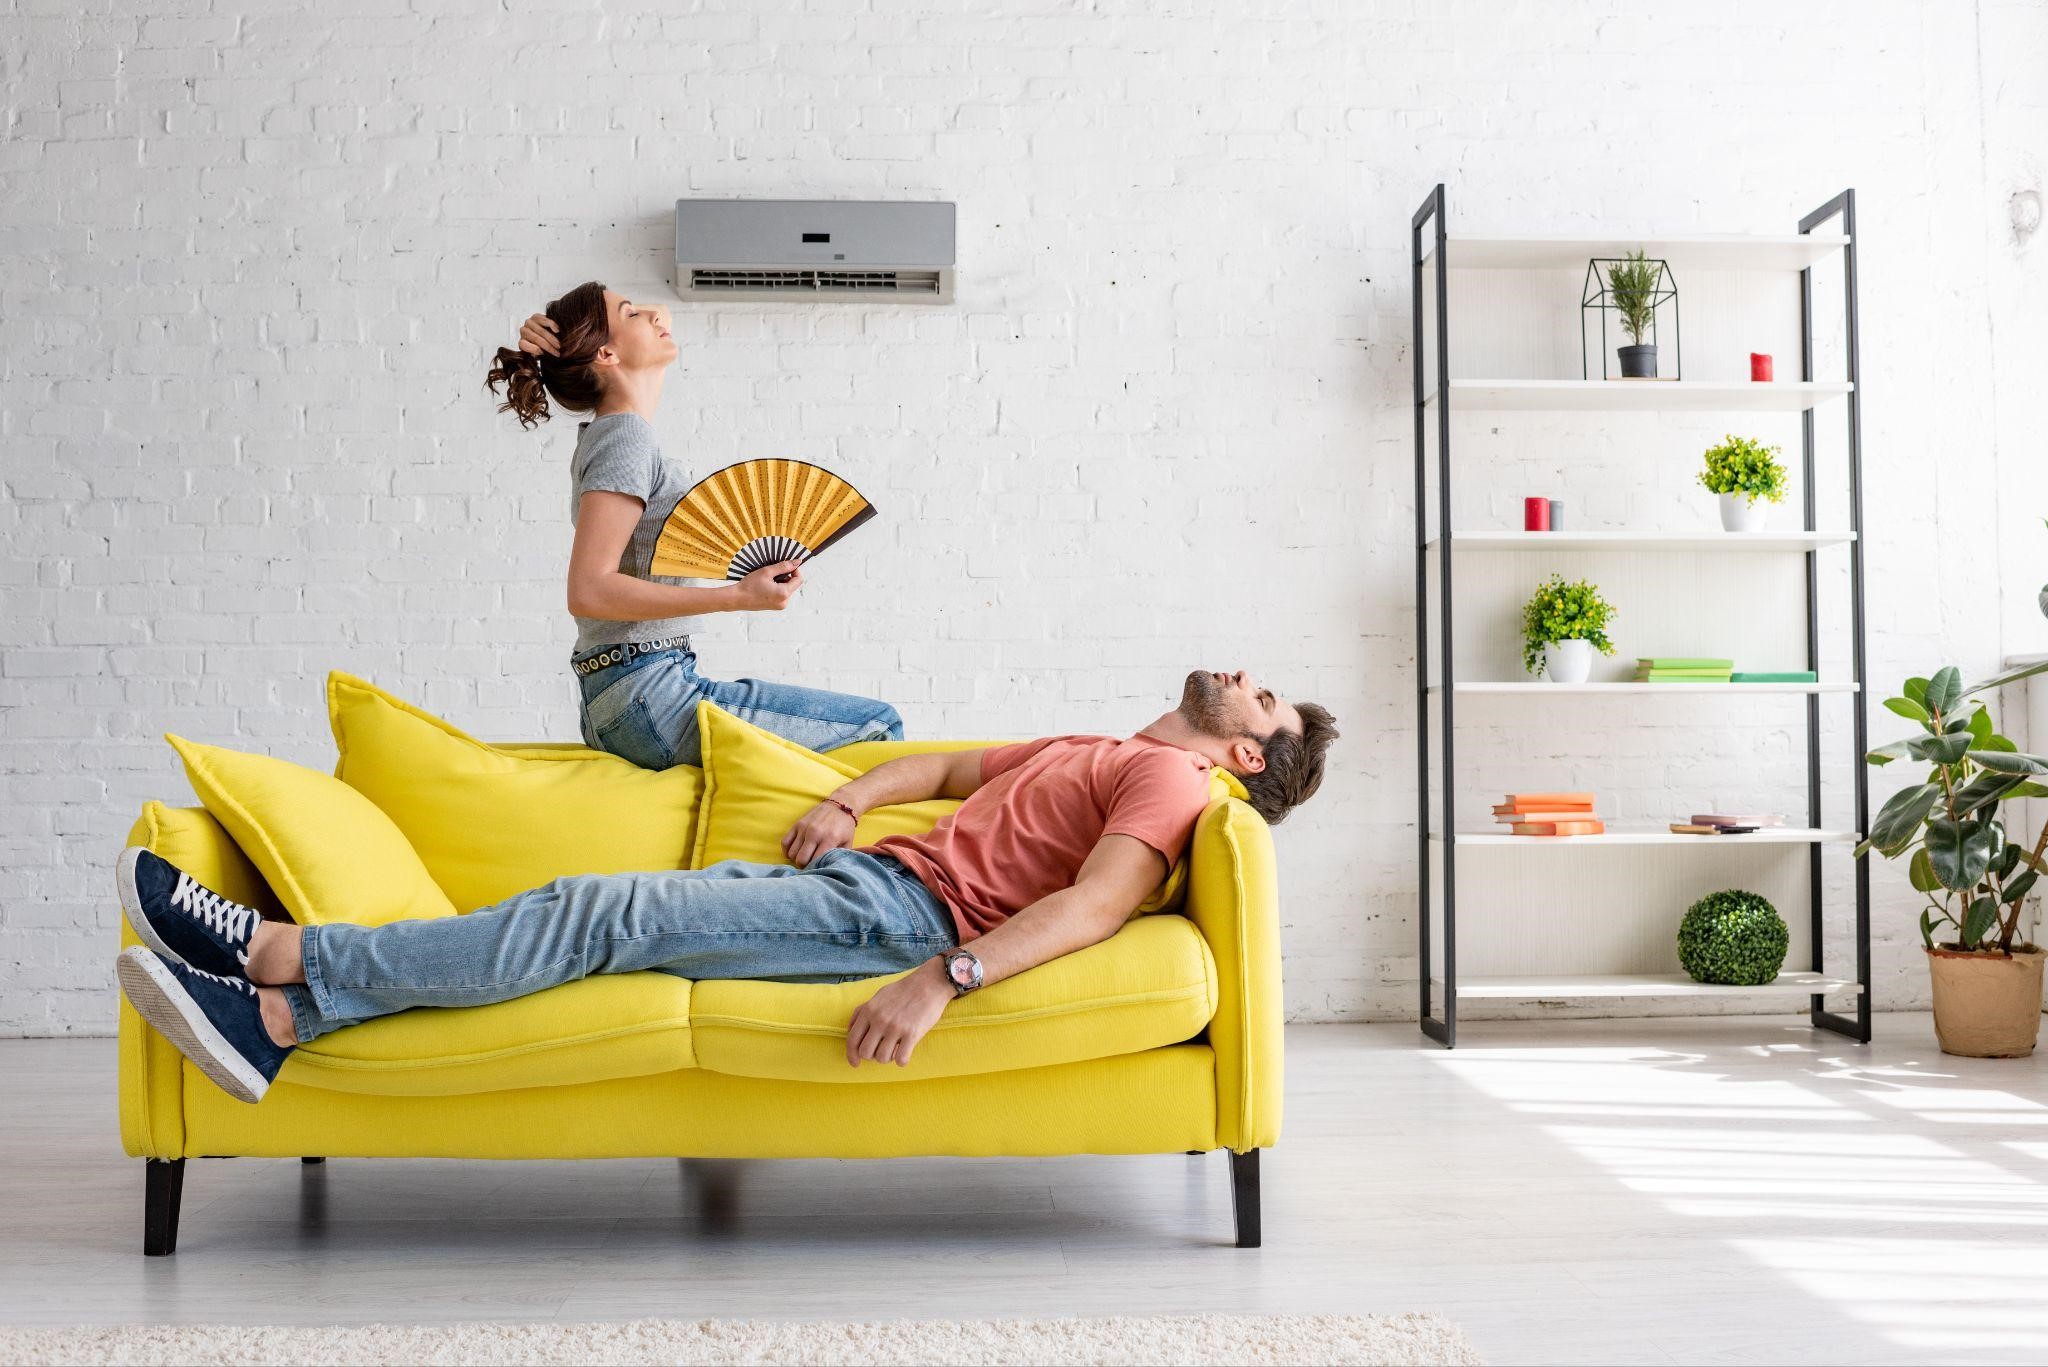 a man lying on yellow sofa and a lady sitting nearby on the sofa with a fan under an air conditioner